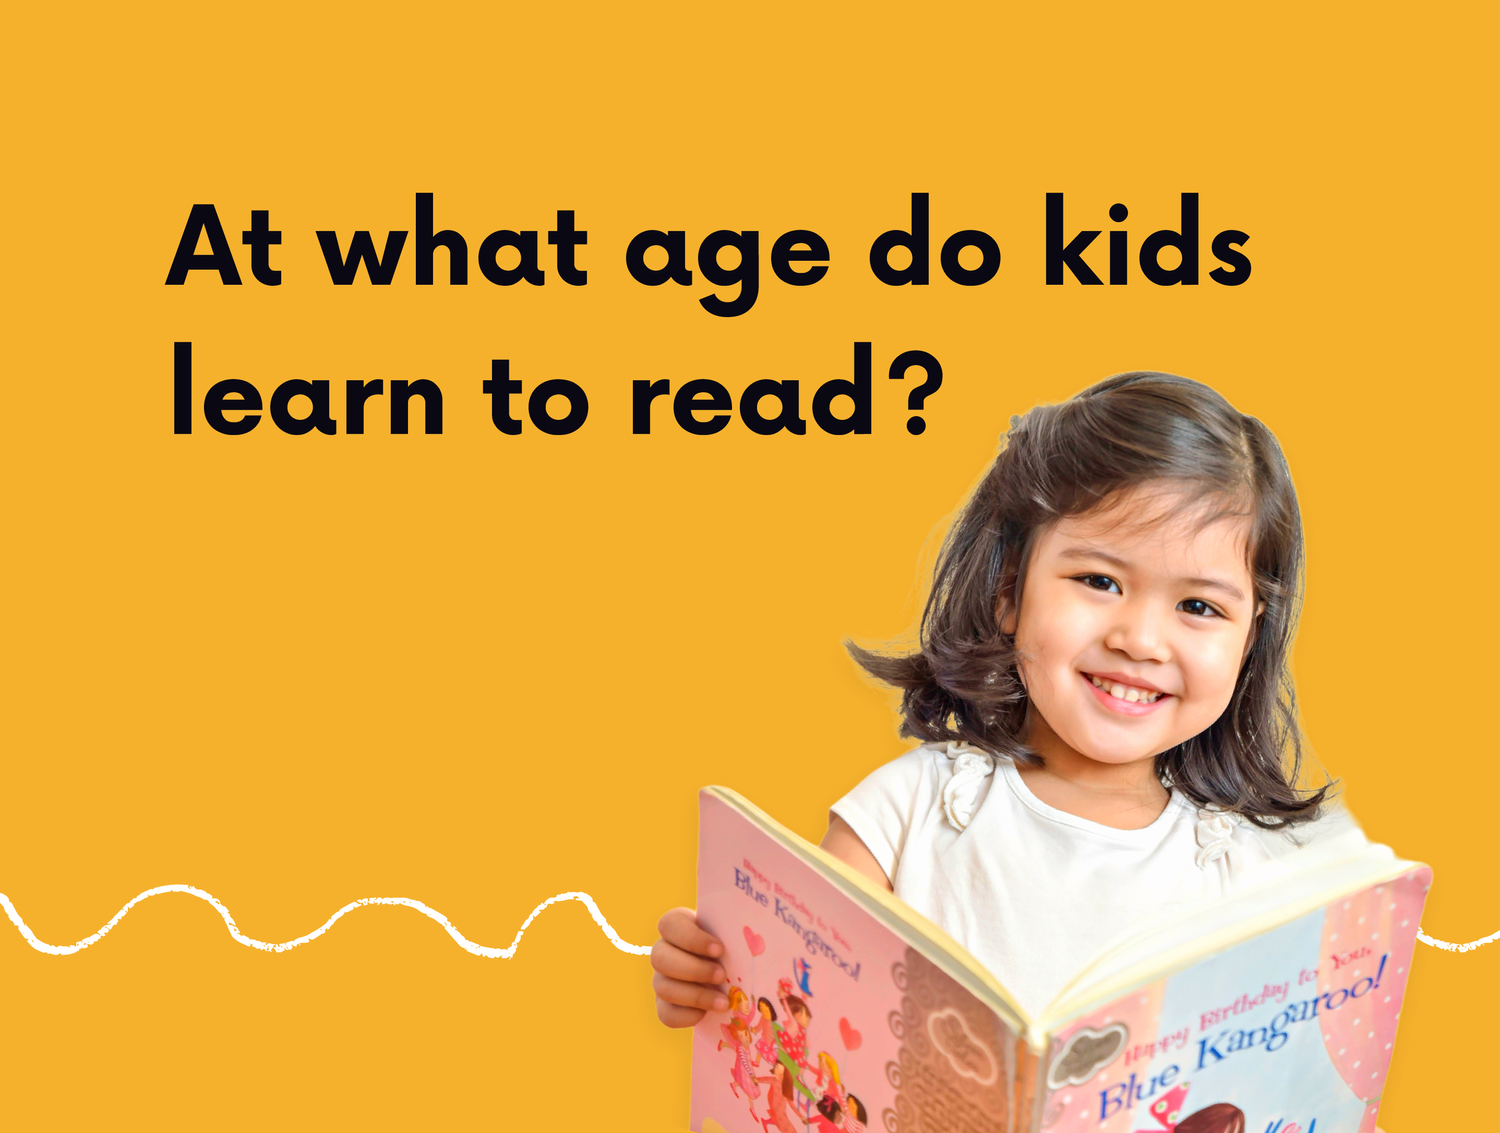 At what age should kids read?